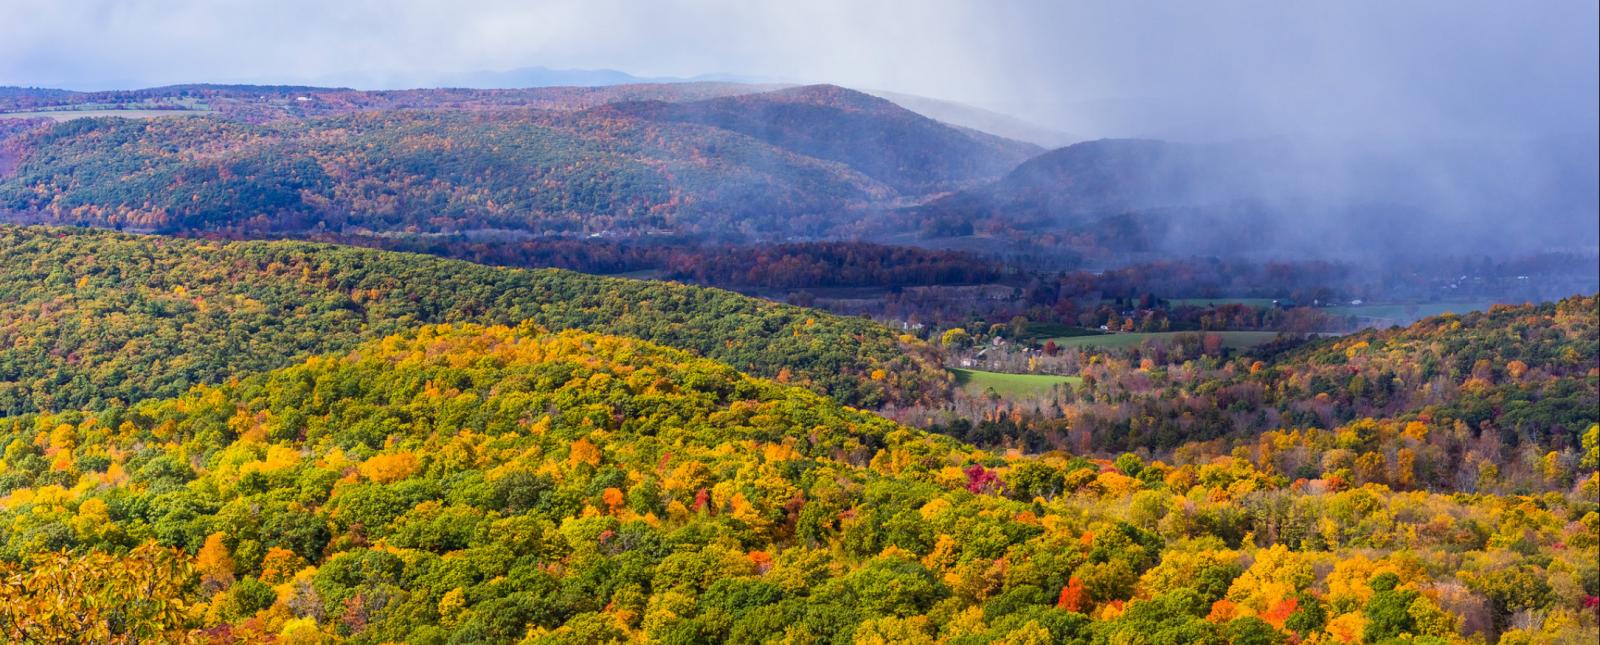 A beautiful view of rolling hills, mountains and fall foliage (Flickr@PW_Photography)